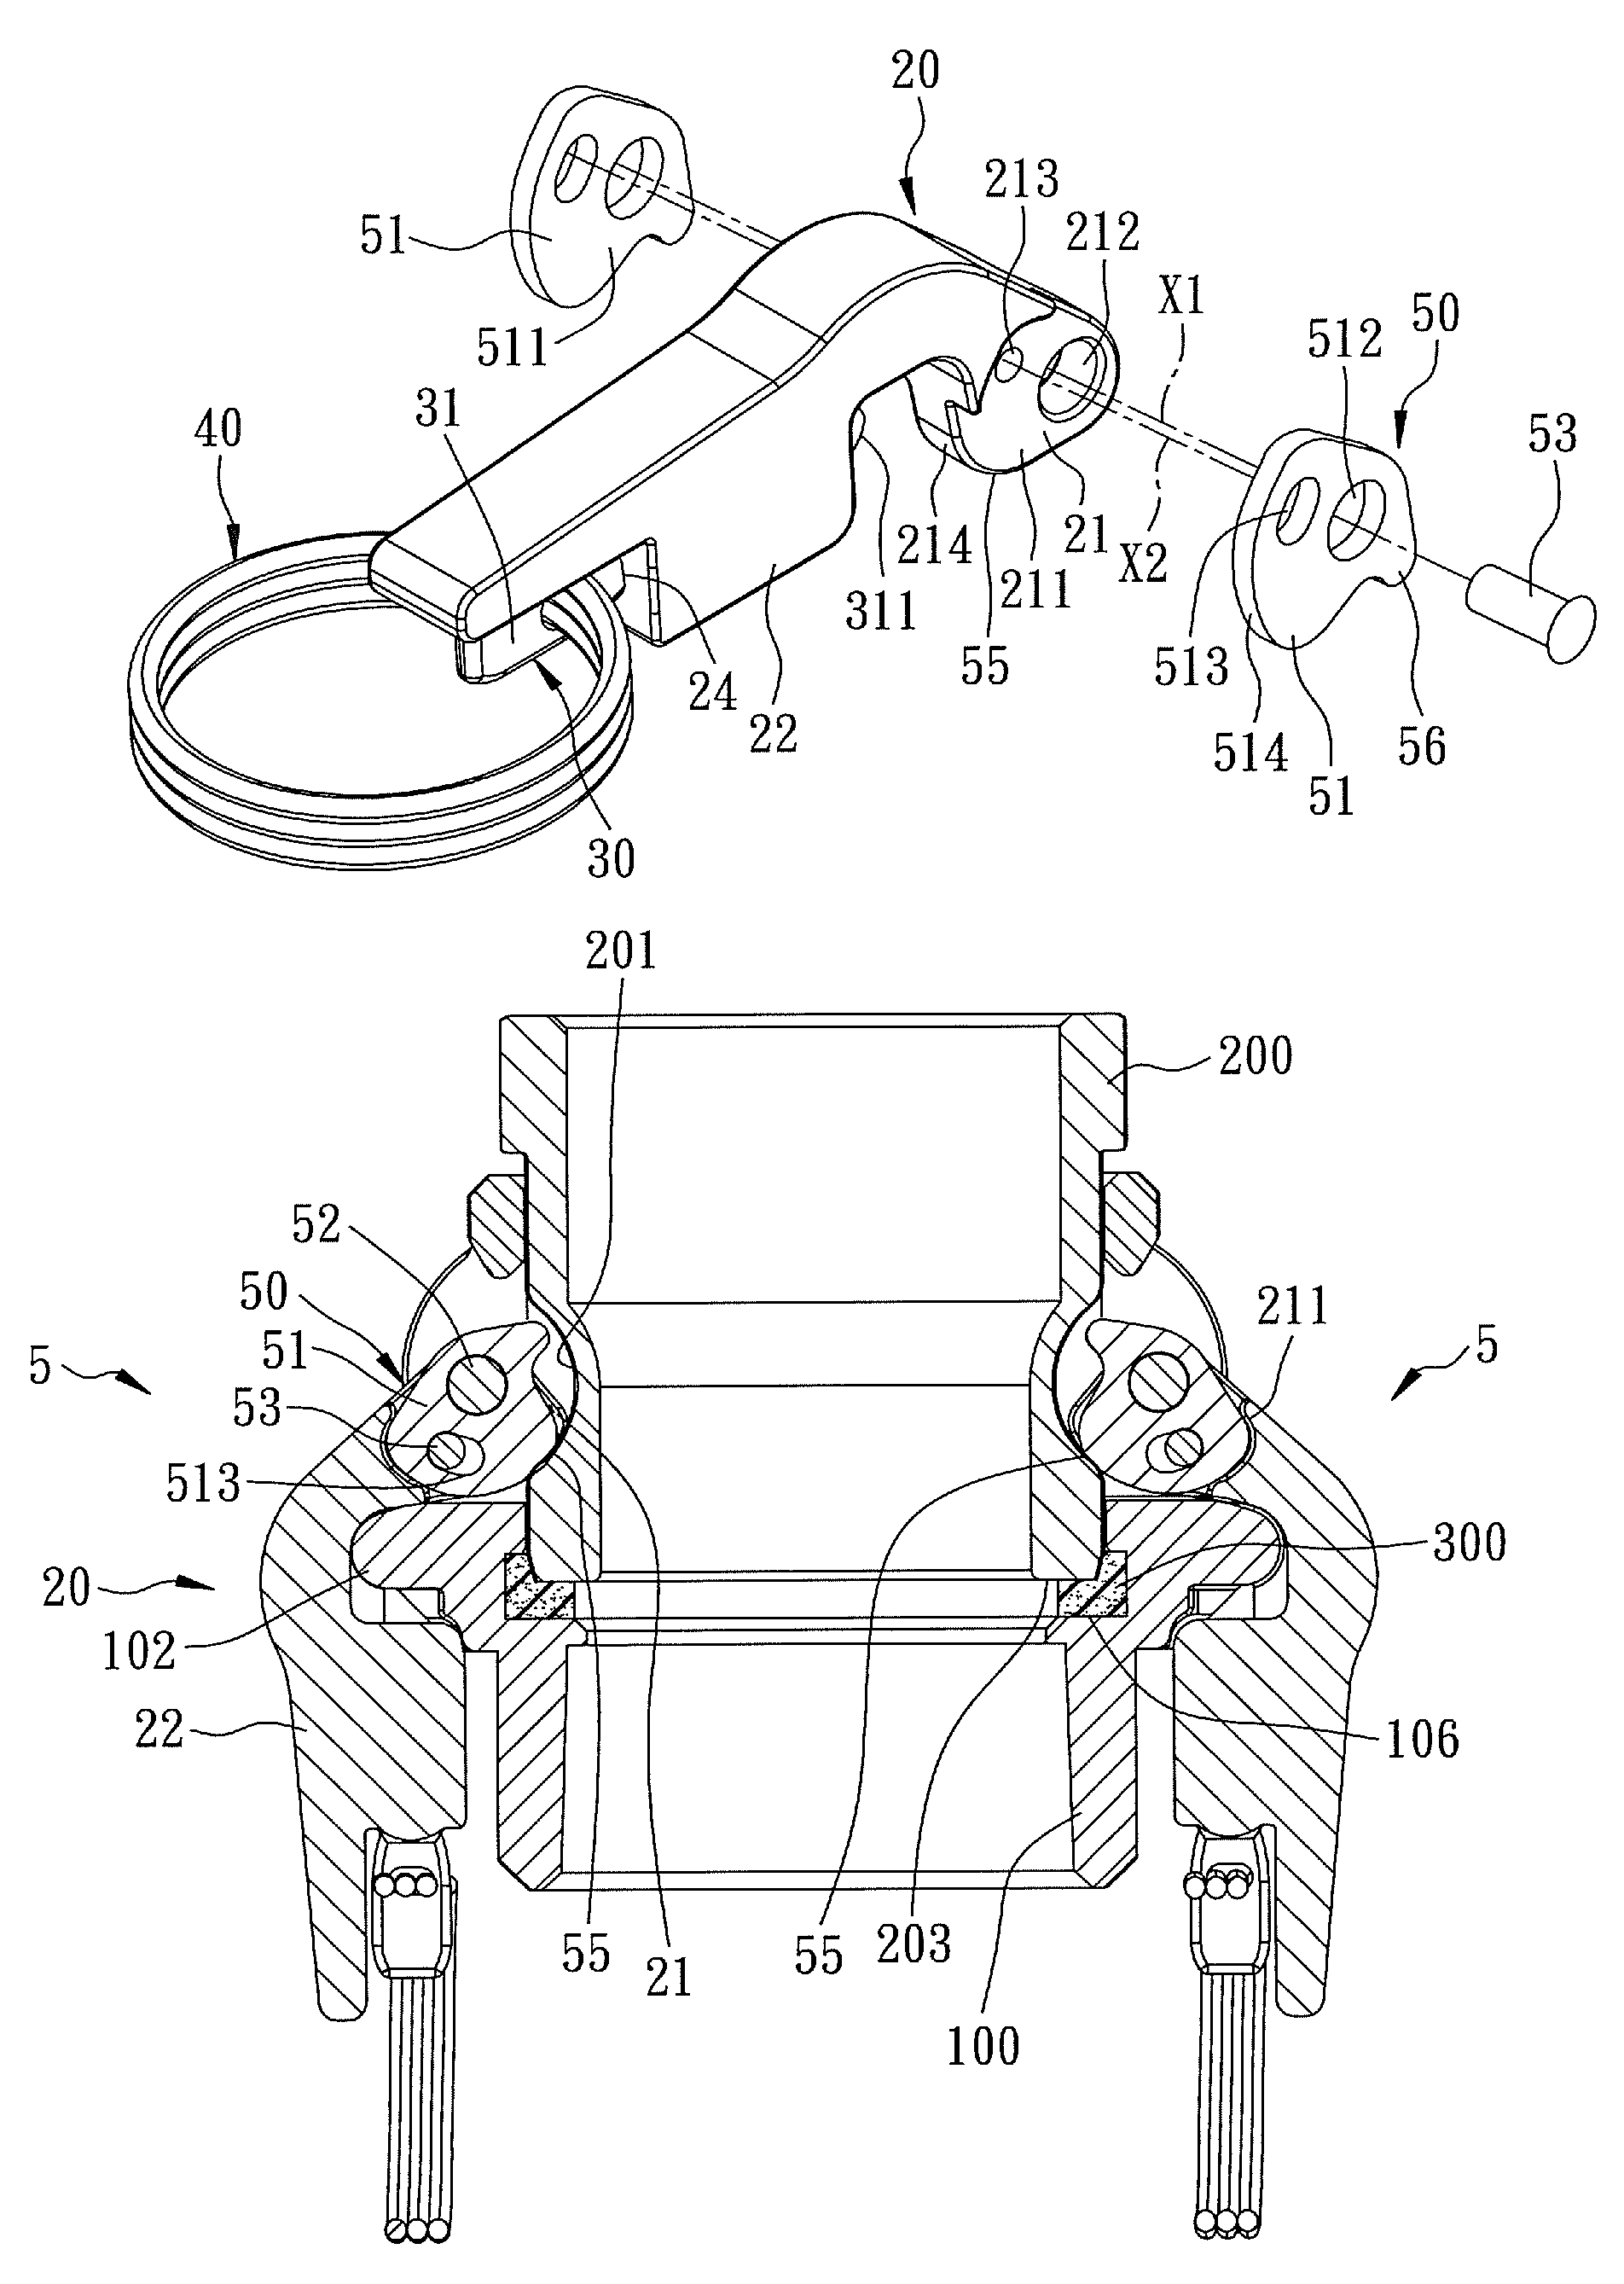 Cam-lock actuating device for use in a locking coupling assembly that couples two tubular members